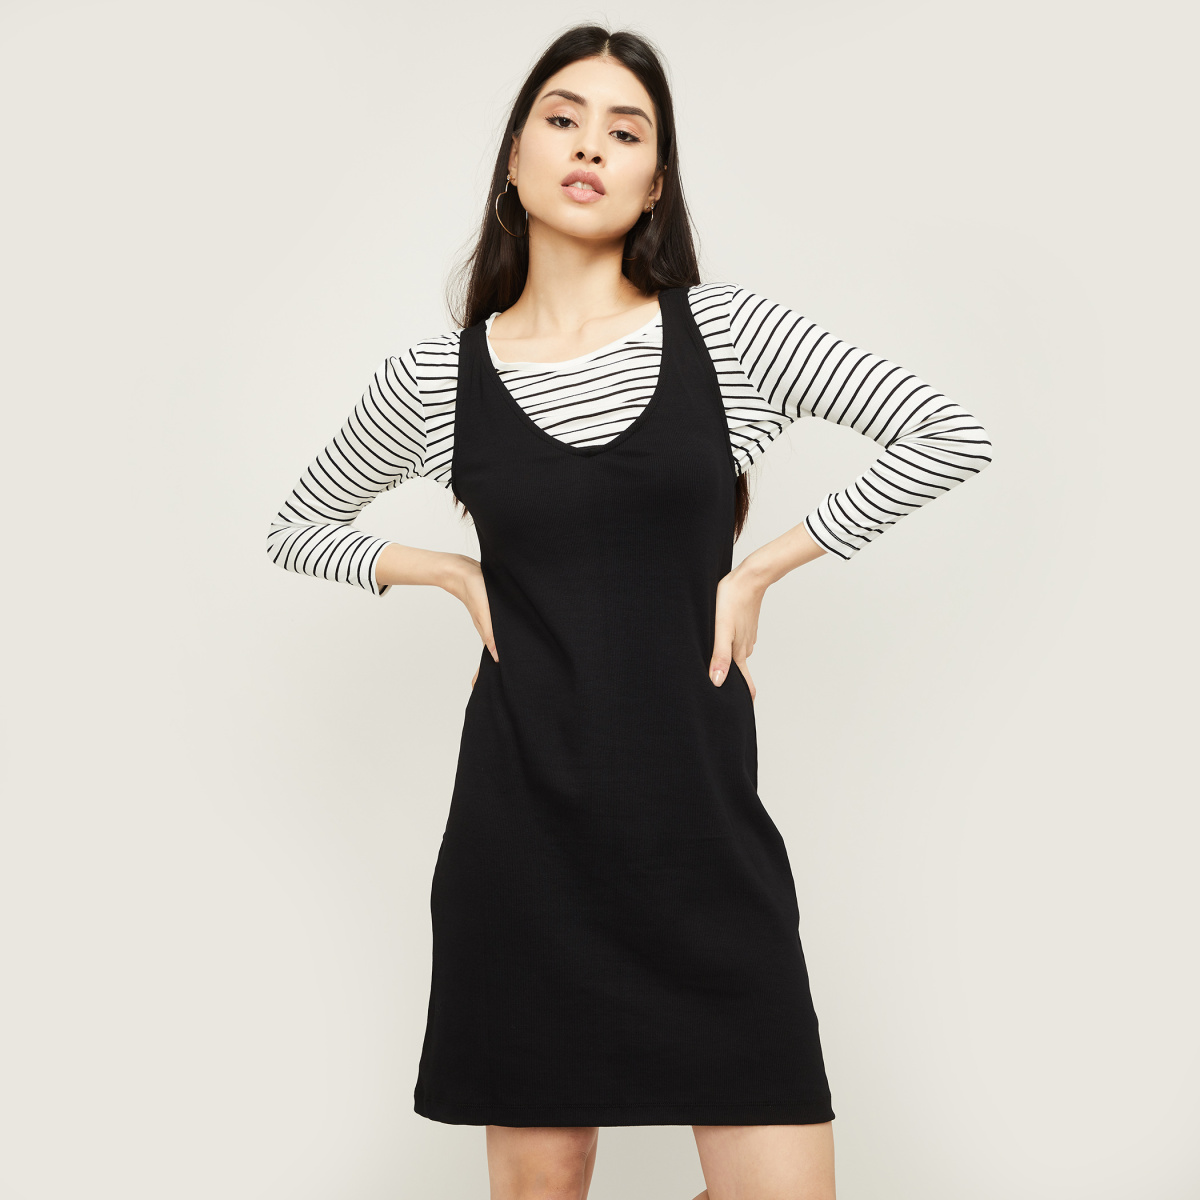 BOSSINI Women A-line Dress with Striped Top